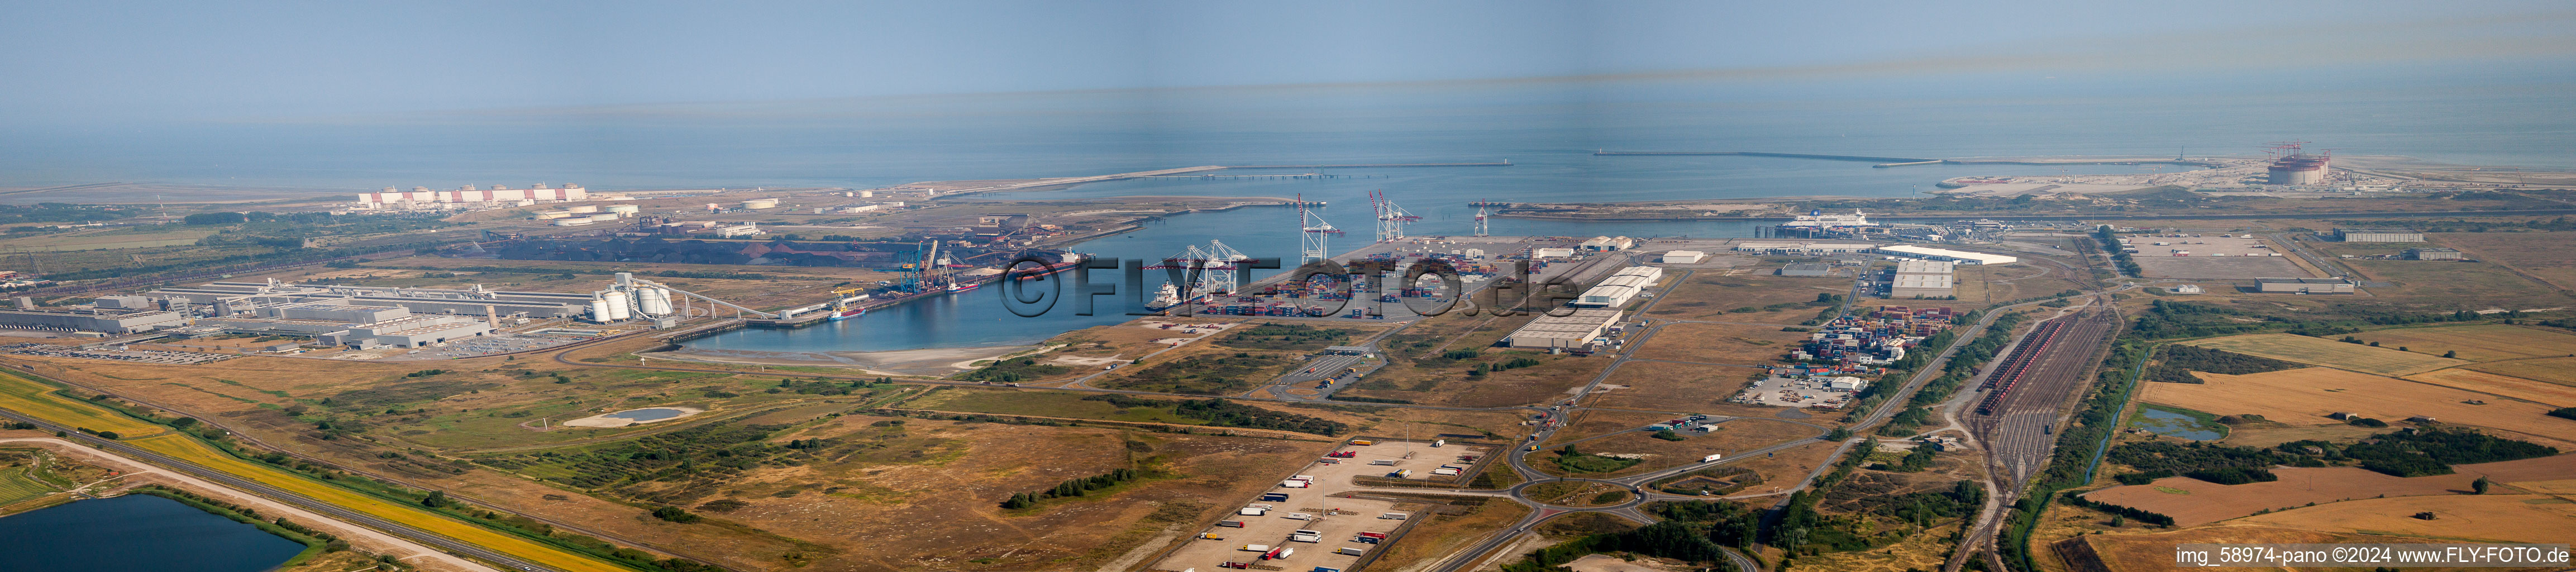 Panoramic view of the Port facilities on the seashore of the Channel-ferry port Dunkerque in Loon-Plage in Hauts-de-France, France